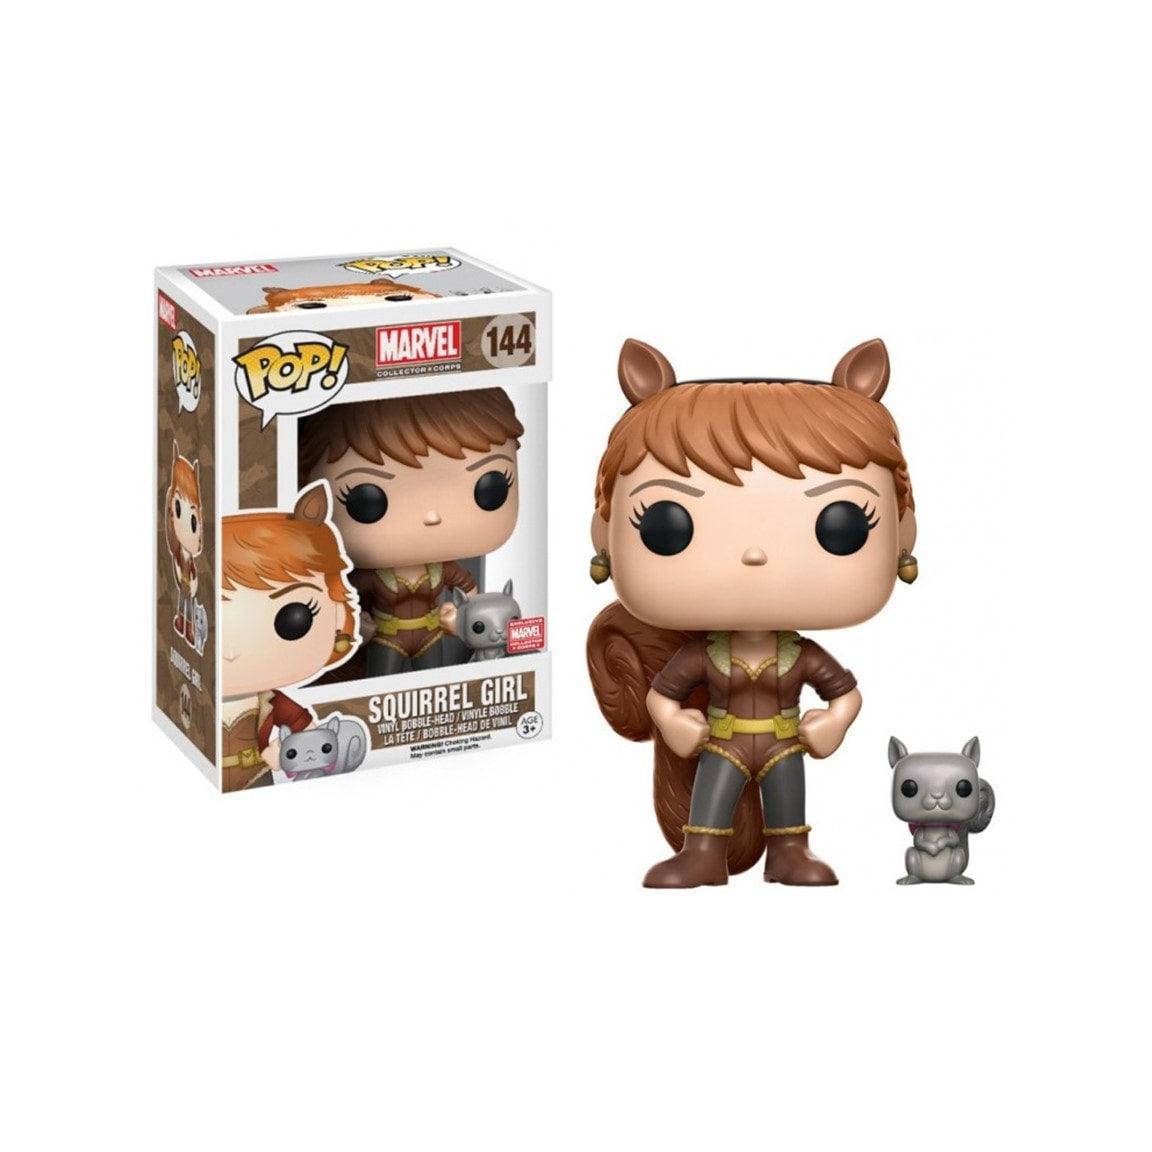 Pop! Marvel - Squirrel Girl - #144 - Marvel Collection Corps EXCLUSIVE - Hobby Champion Inc